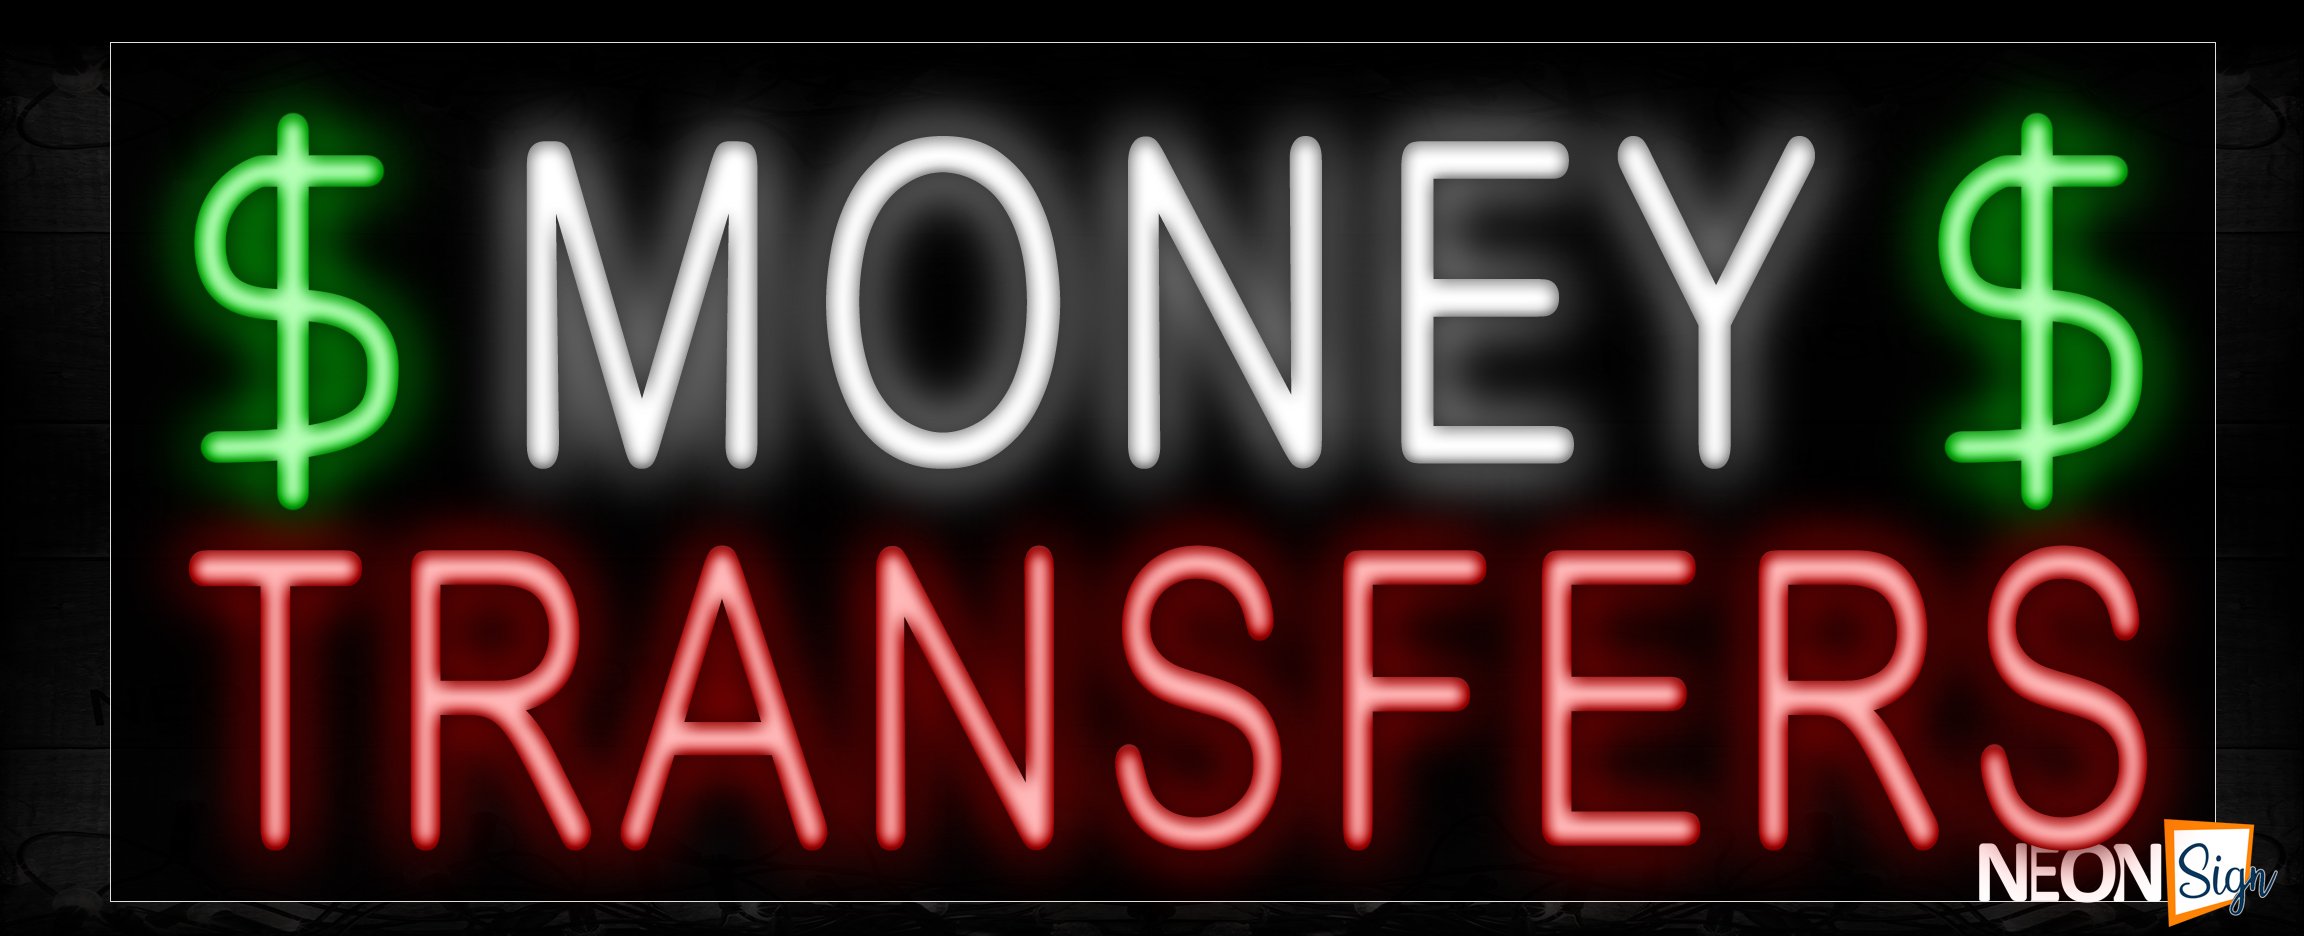 Image of 11210 Money Transfers with dollar sign logo Neon Sign_13x32 Black Backing